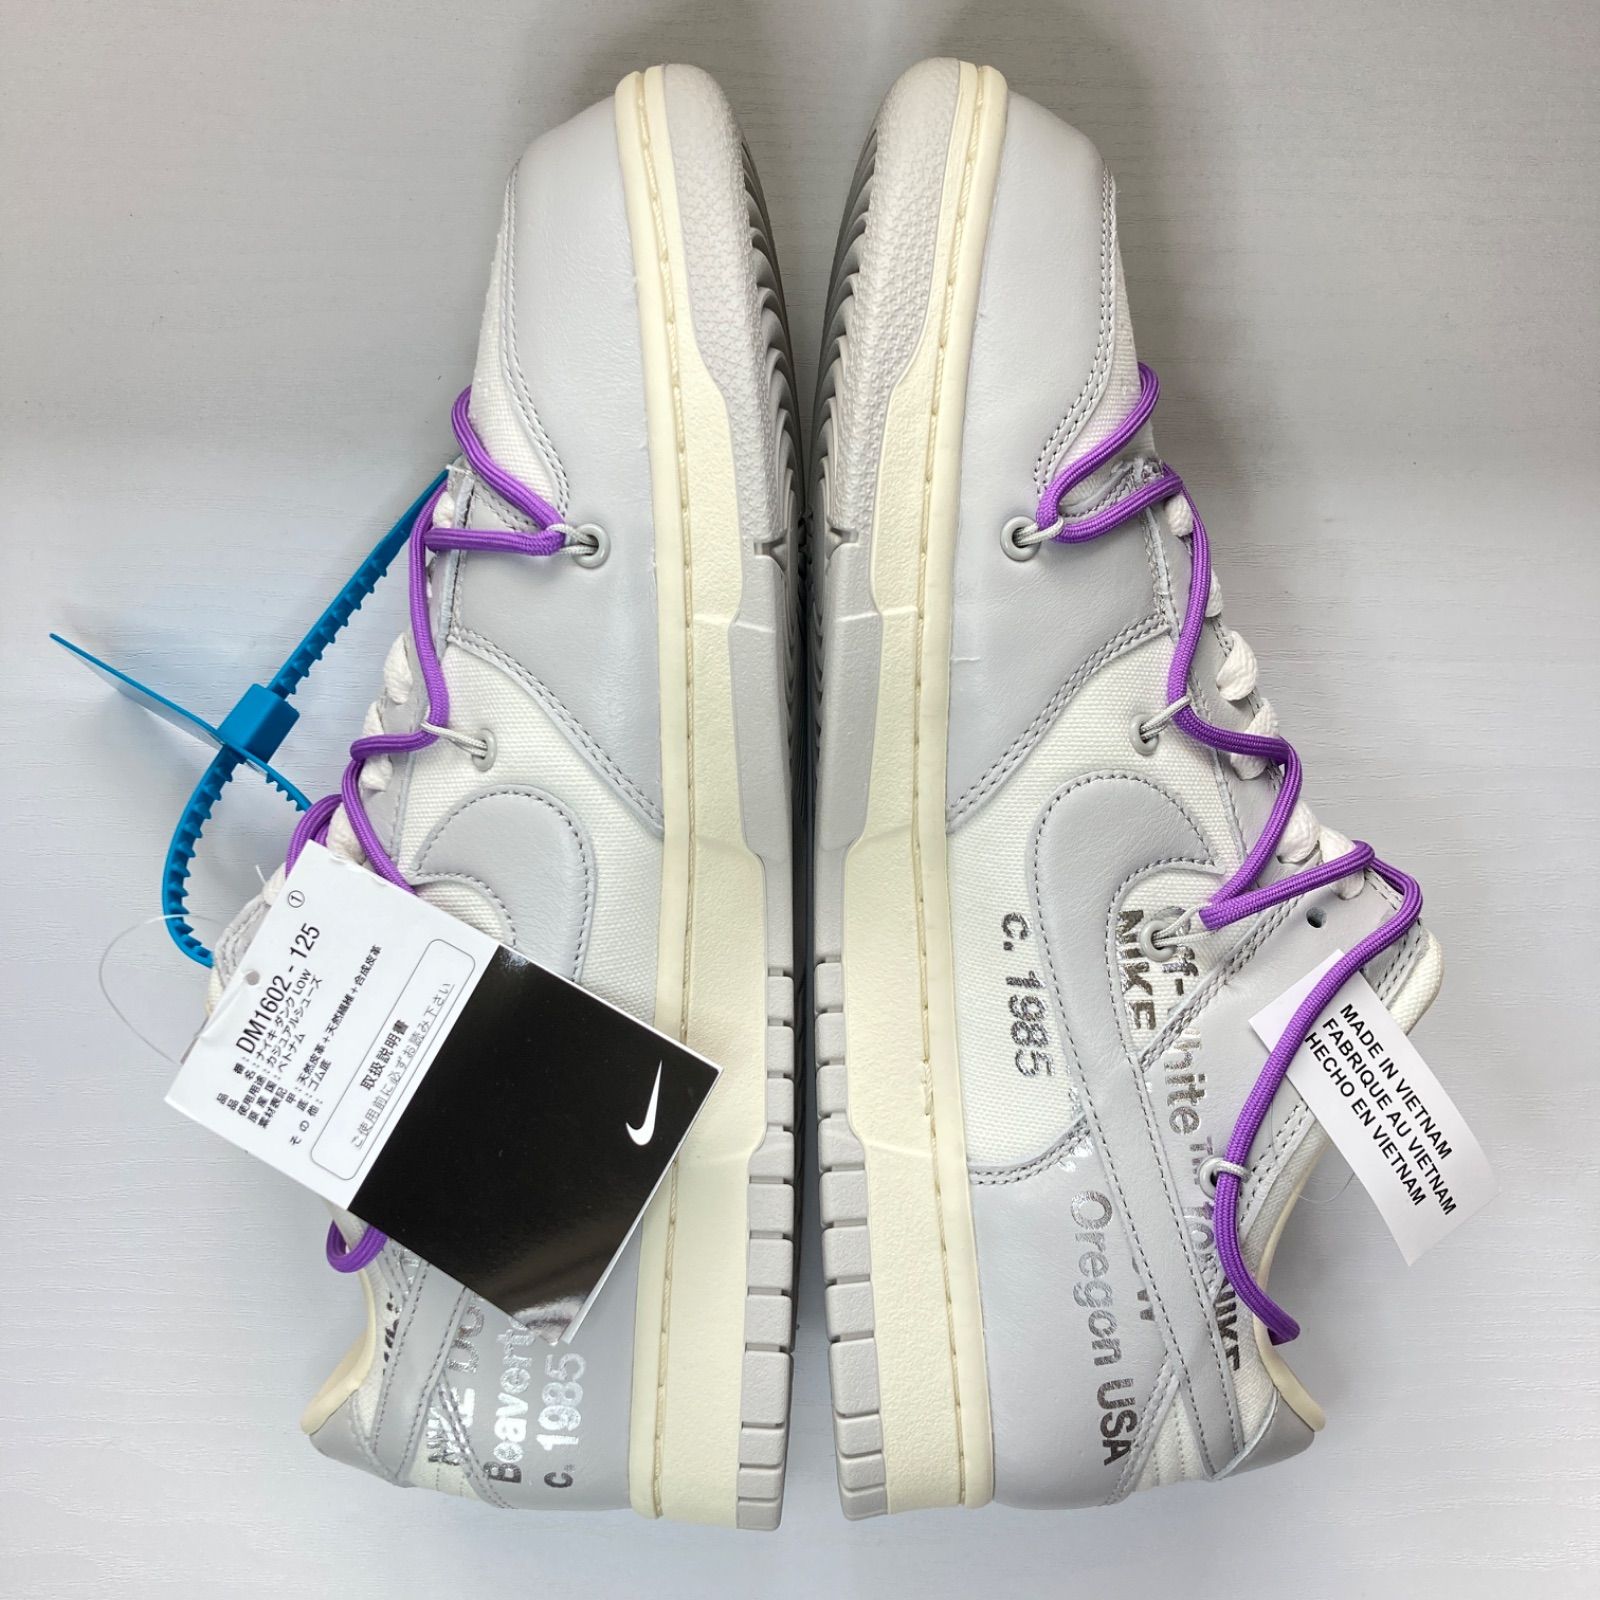 OFF-WHITE Nike Dunk Low 1 of 50 “47” 【フォロー10%OFF】 - メルカリ